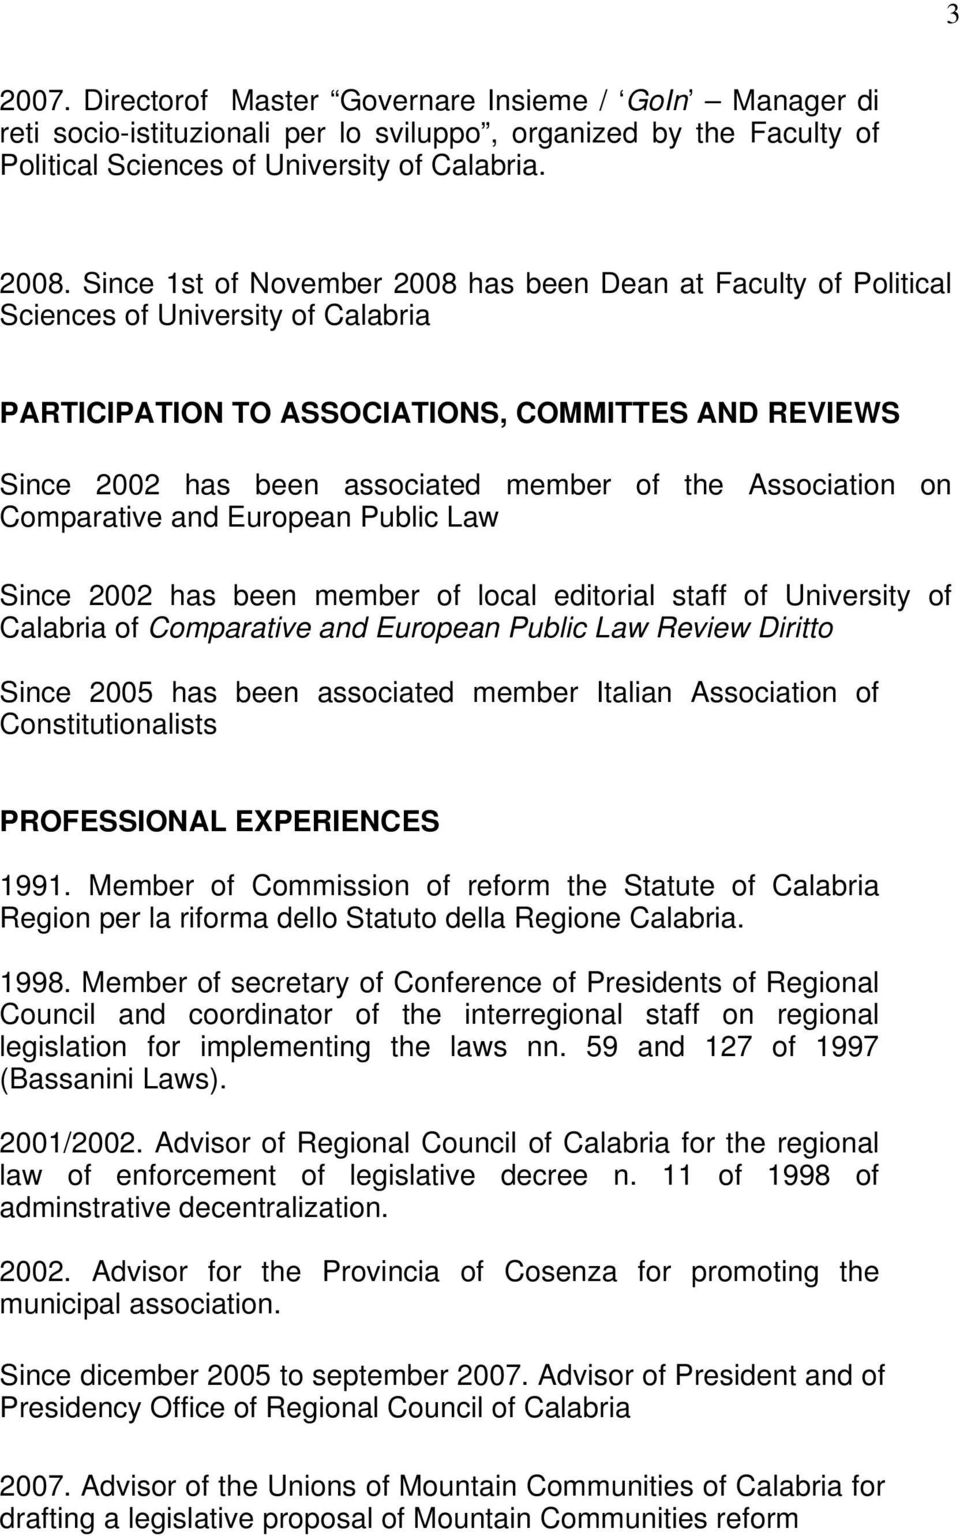 Association on Comparative and European Public Law Since 2002 has been member of local editorial staff of University of Calabria of Comparative and European Public Law Review Diritto Since 2005 has